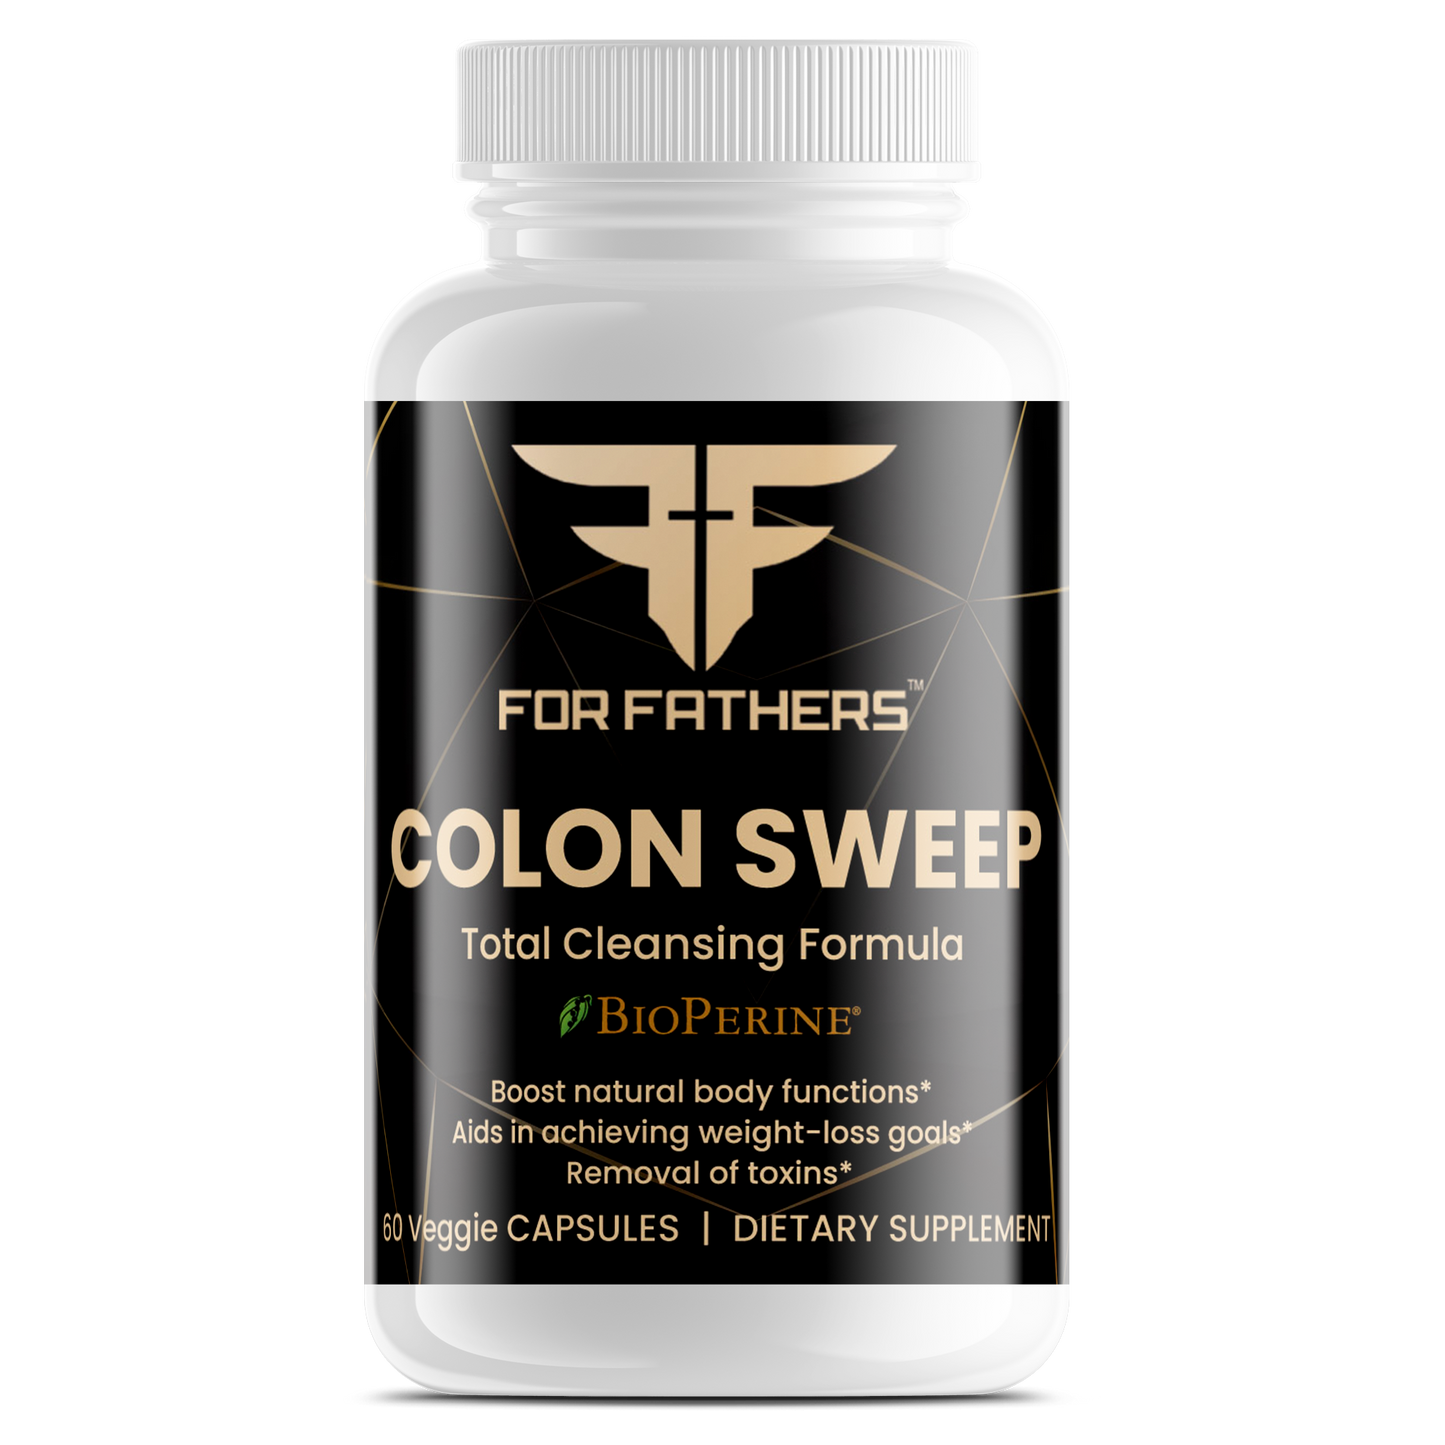 Colon Sweep (Total Cleansing Formula)